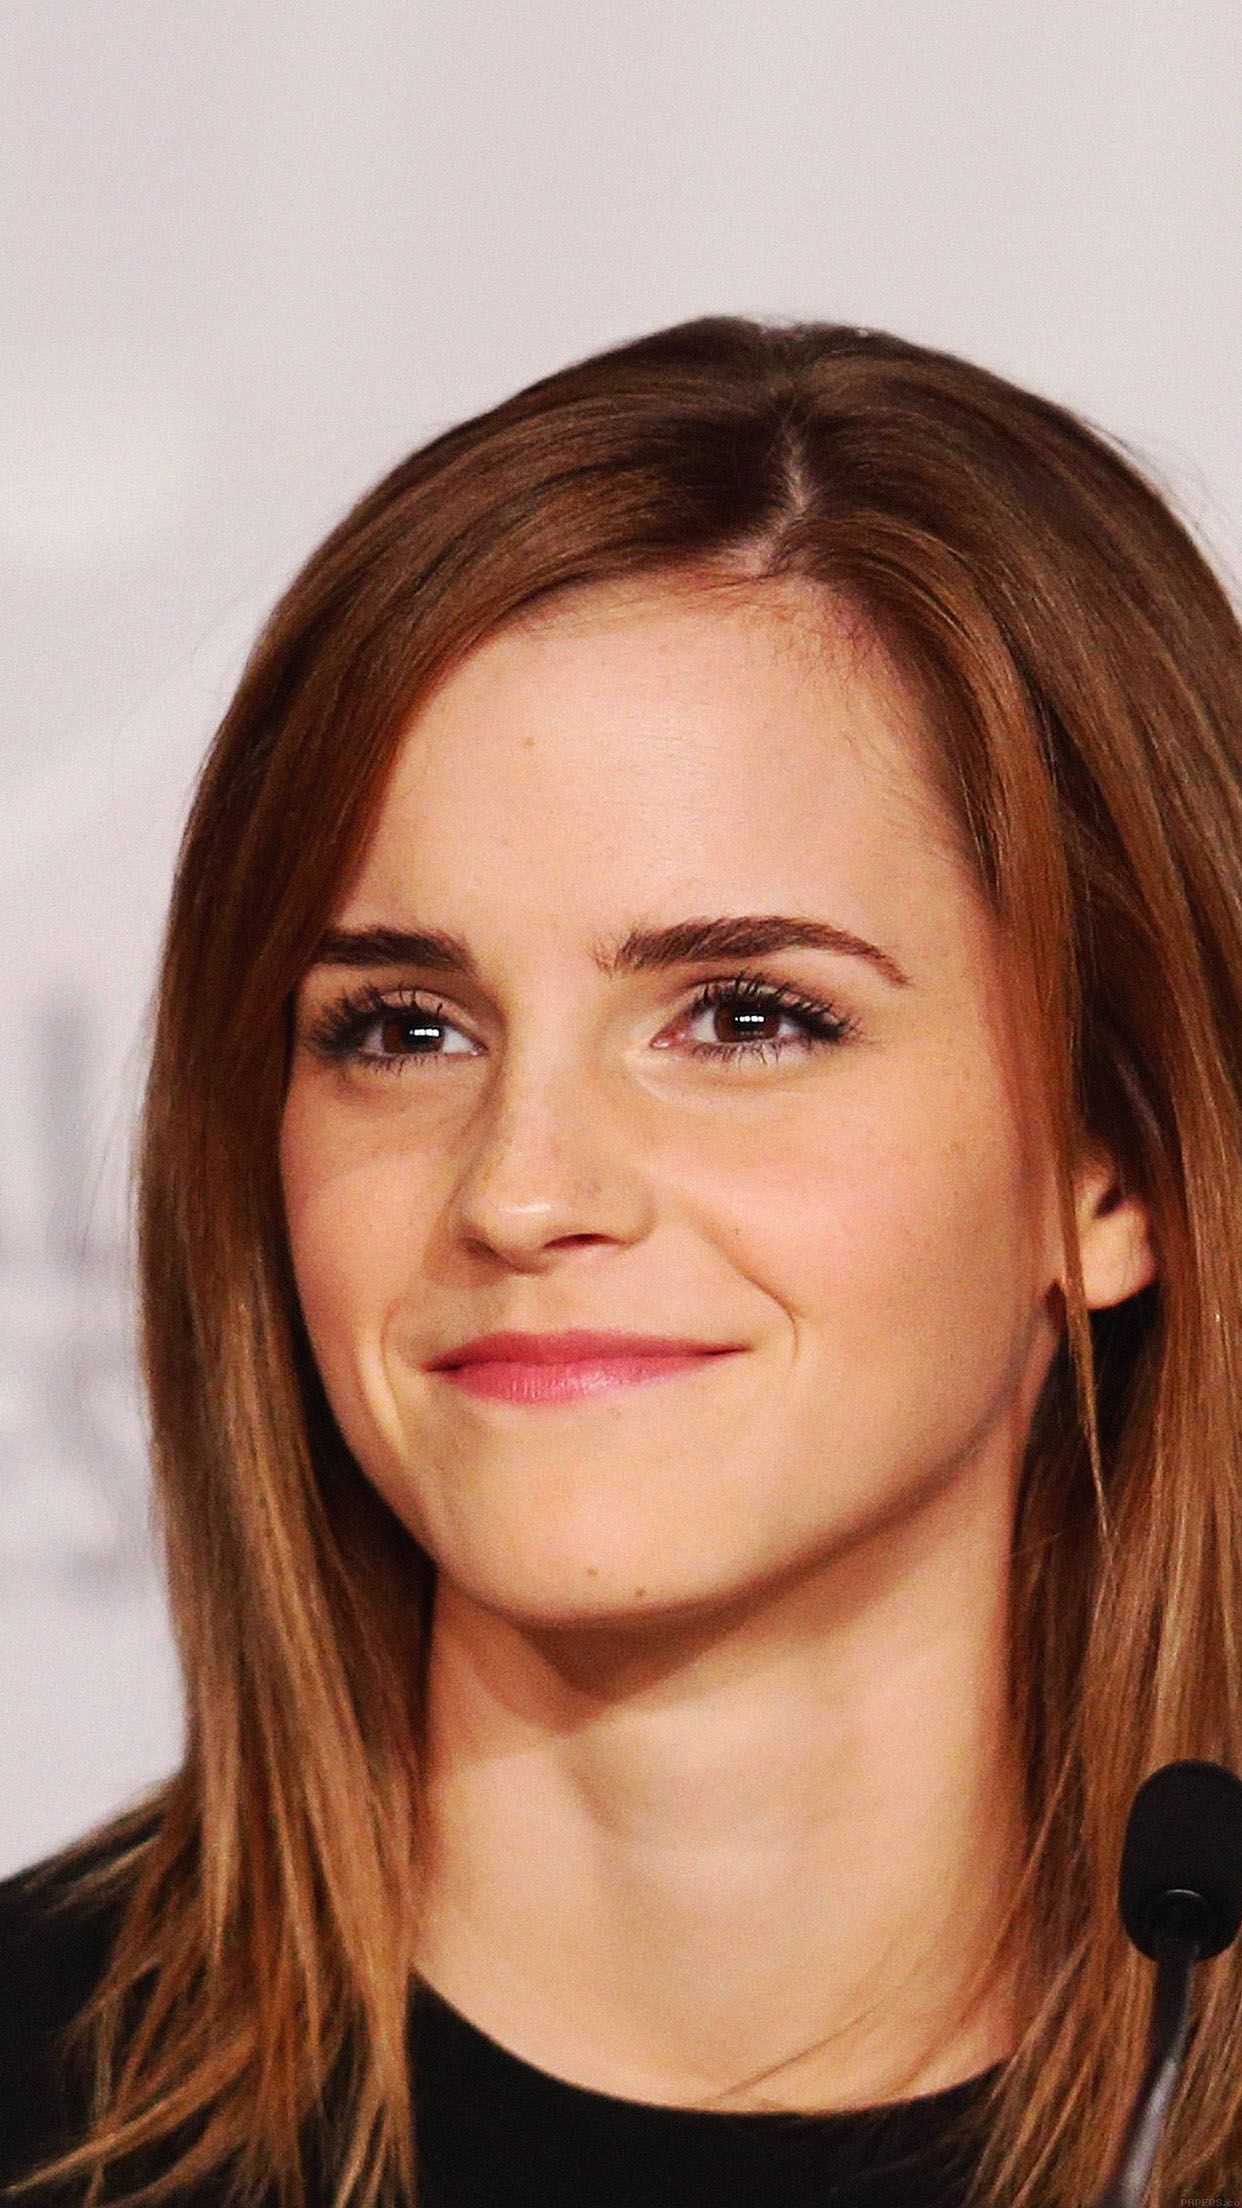 Wallpaper Emma Watson Smile Cannes Film Girl Android wallpaper